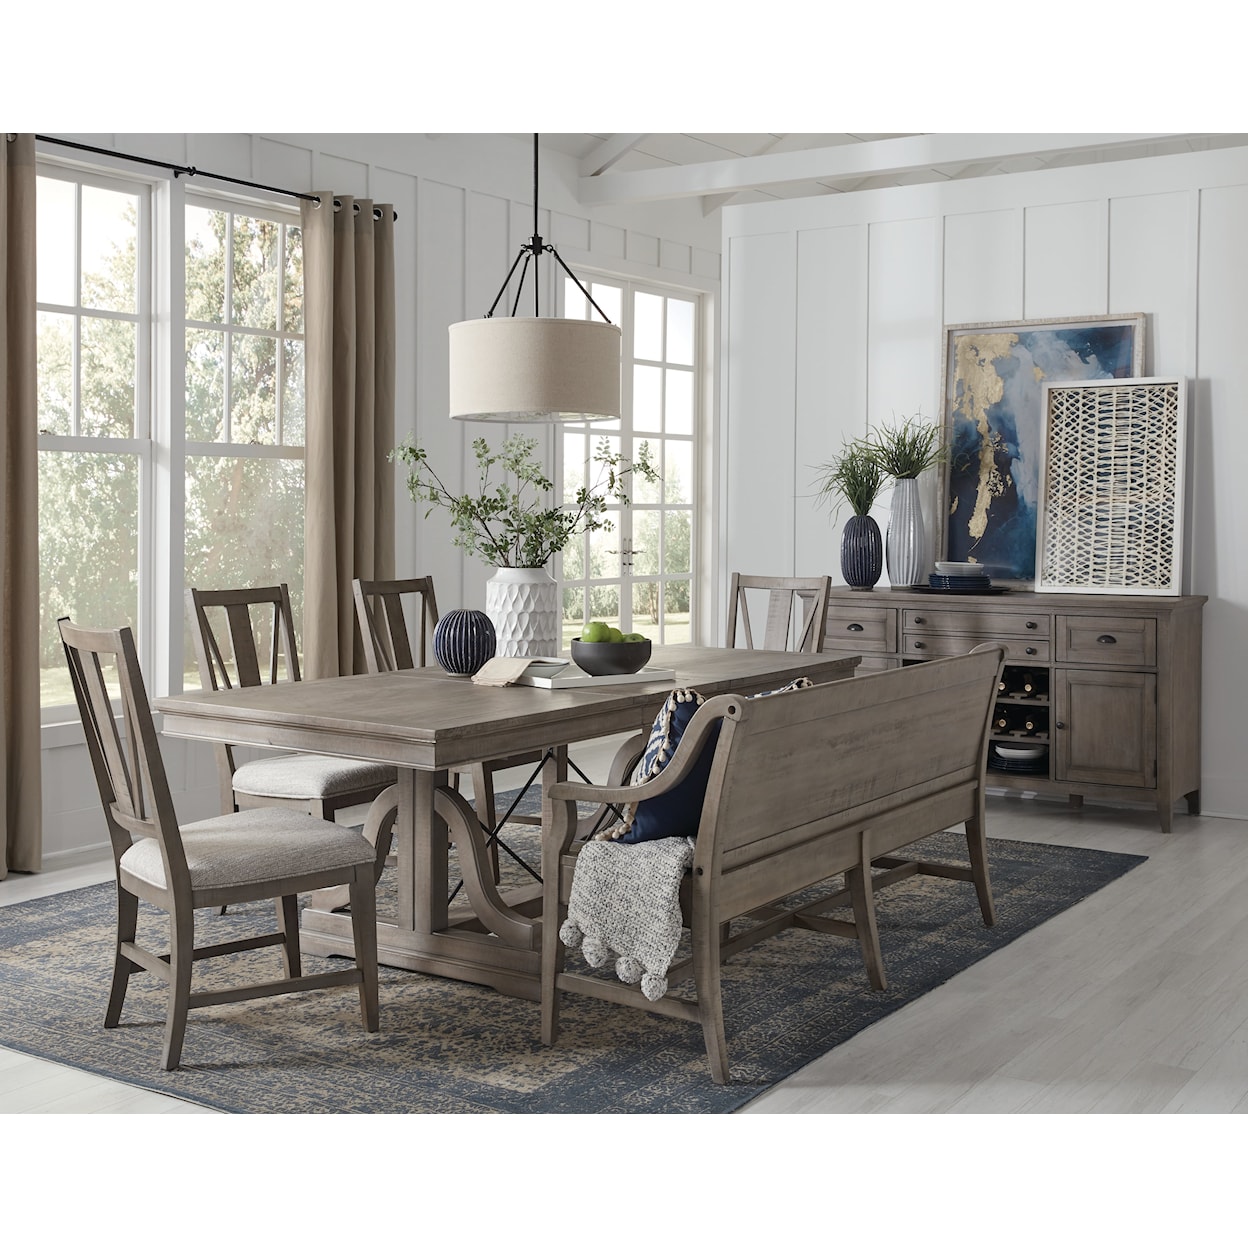 Magnussen Home Paxton Place Dining 6-Piece Dining Set